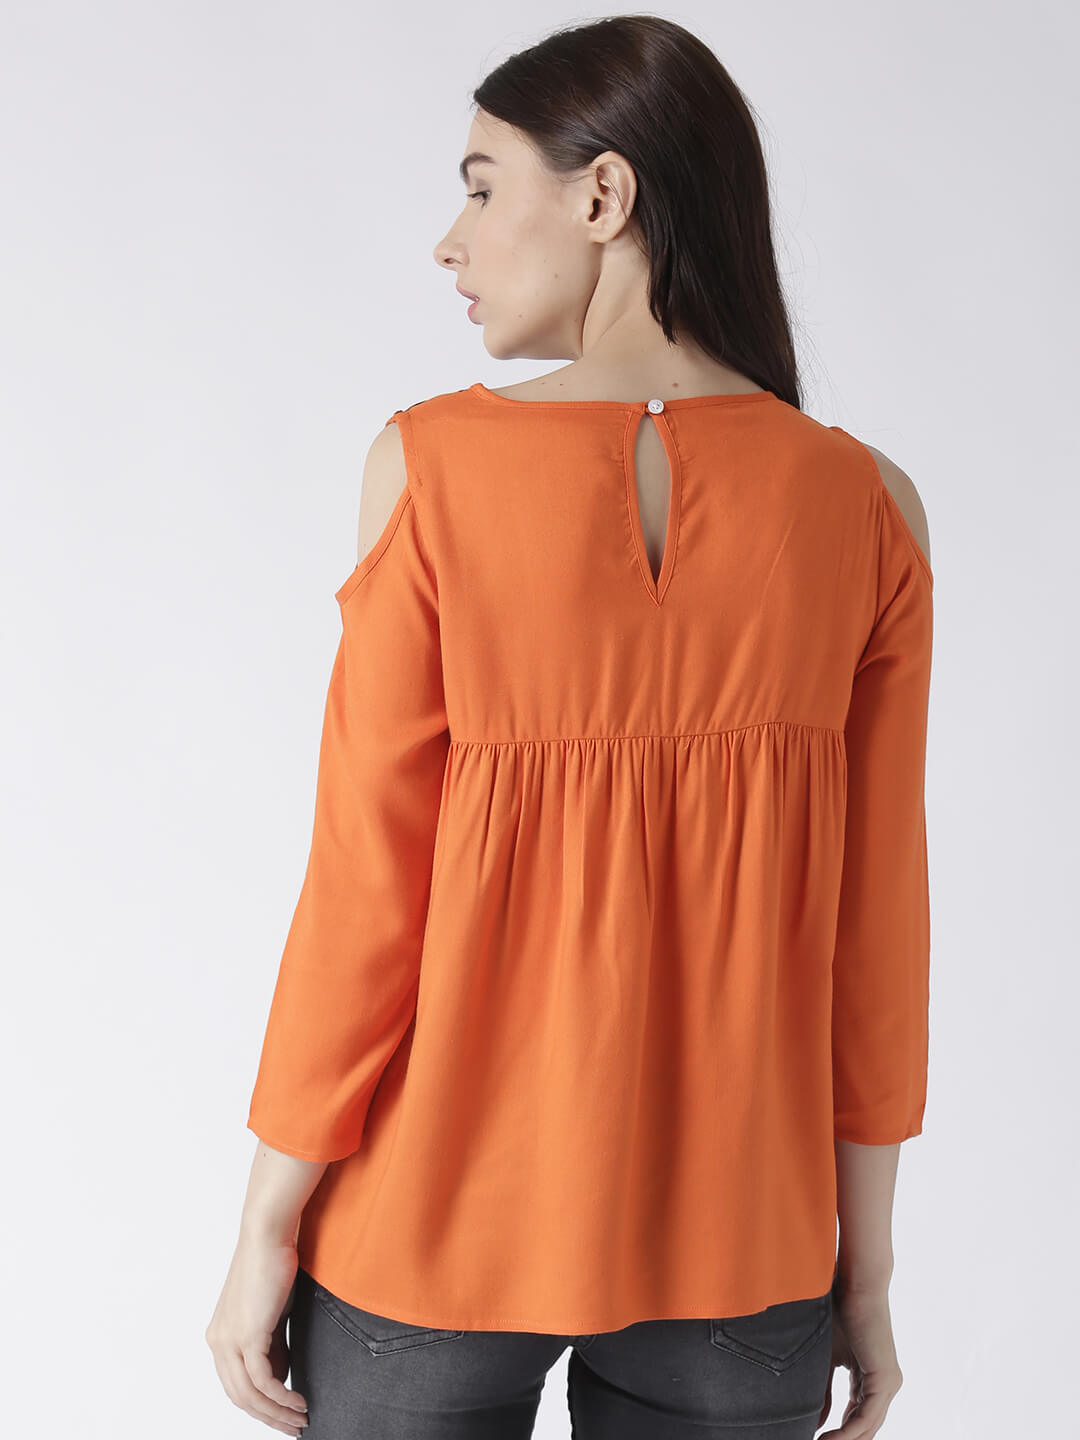 Women'S Orange Cold Shoulder Top With Yoke Embroidery